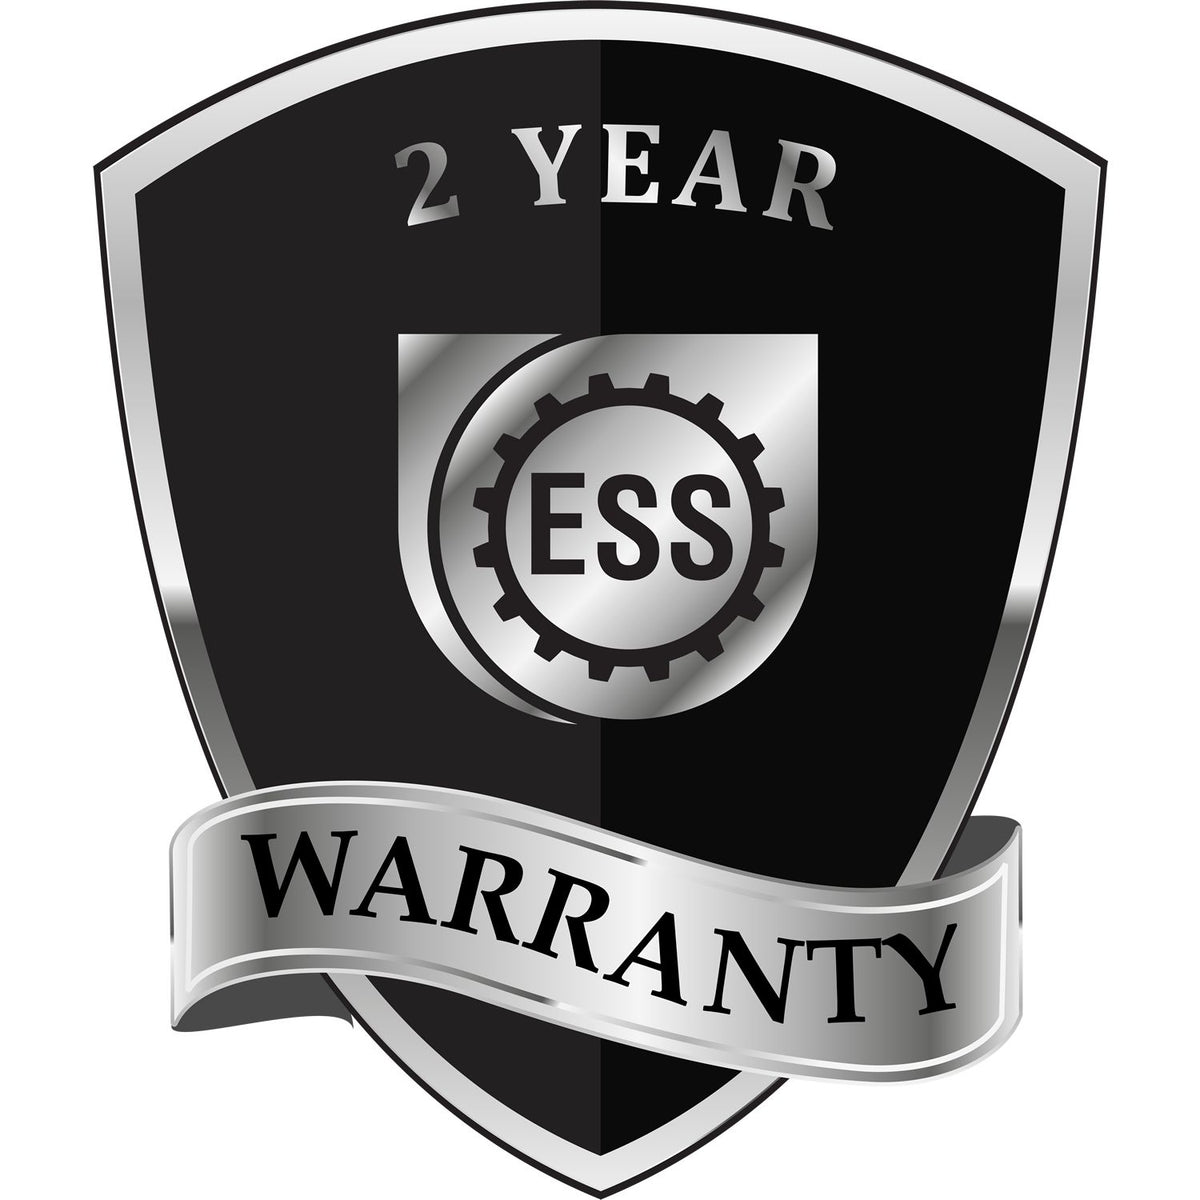 A badge or emblem showing a warranty icon for the Long Reach Georgia Land Surveyor Seal